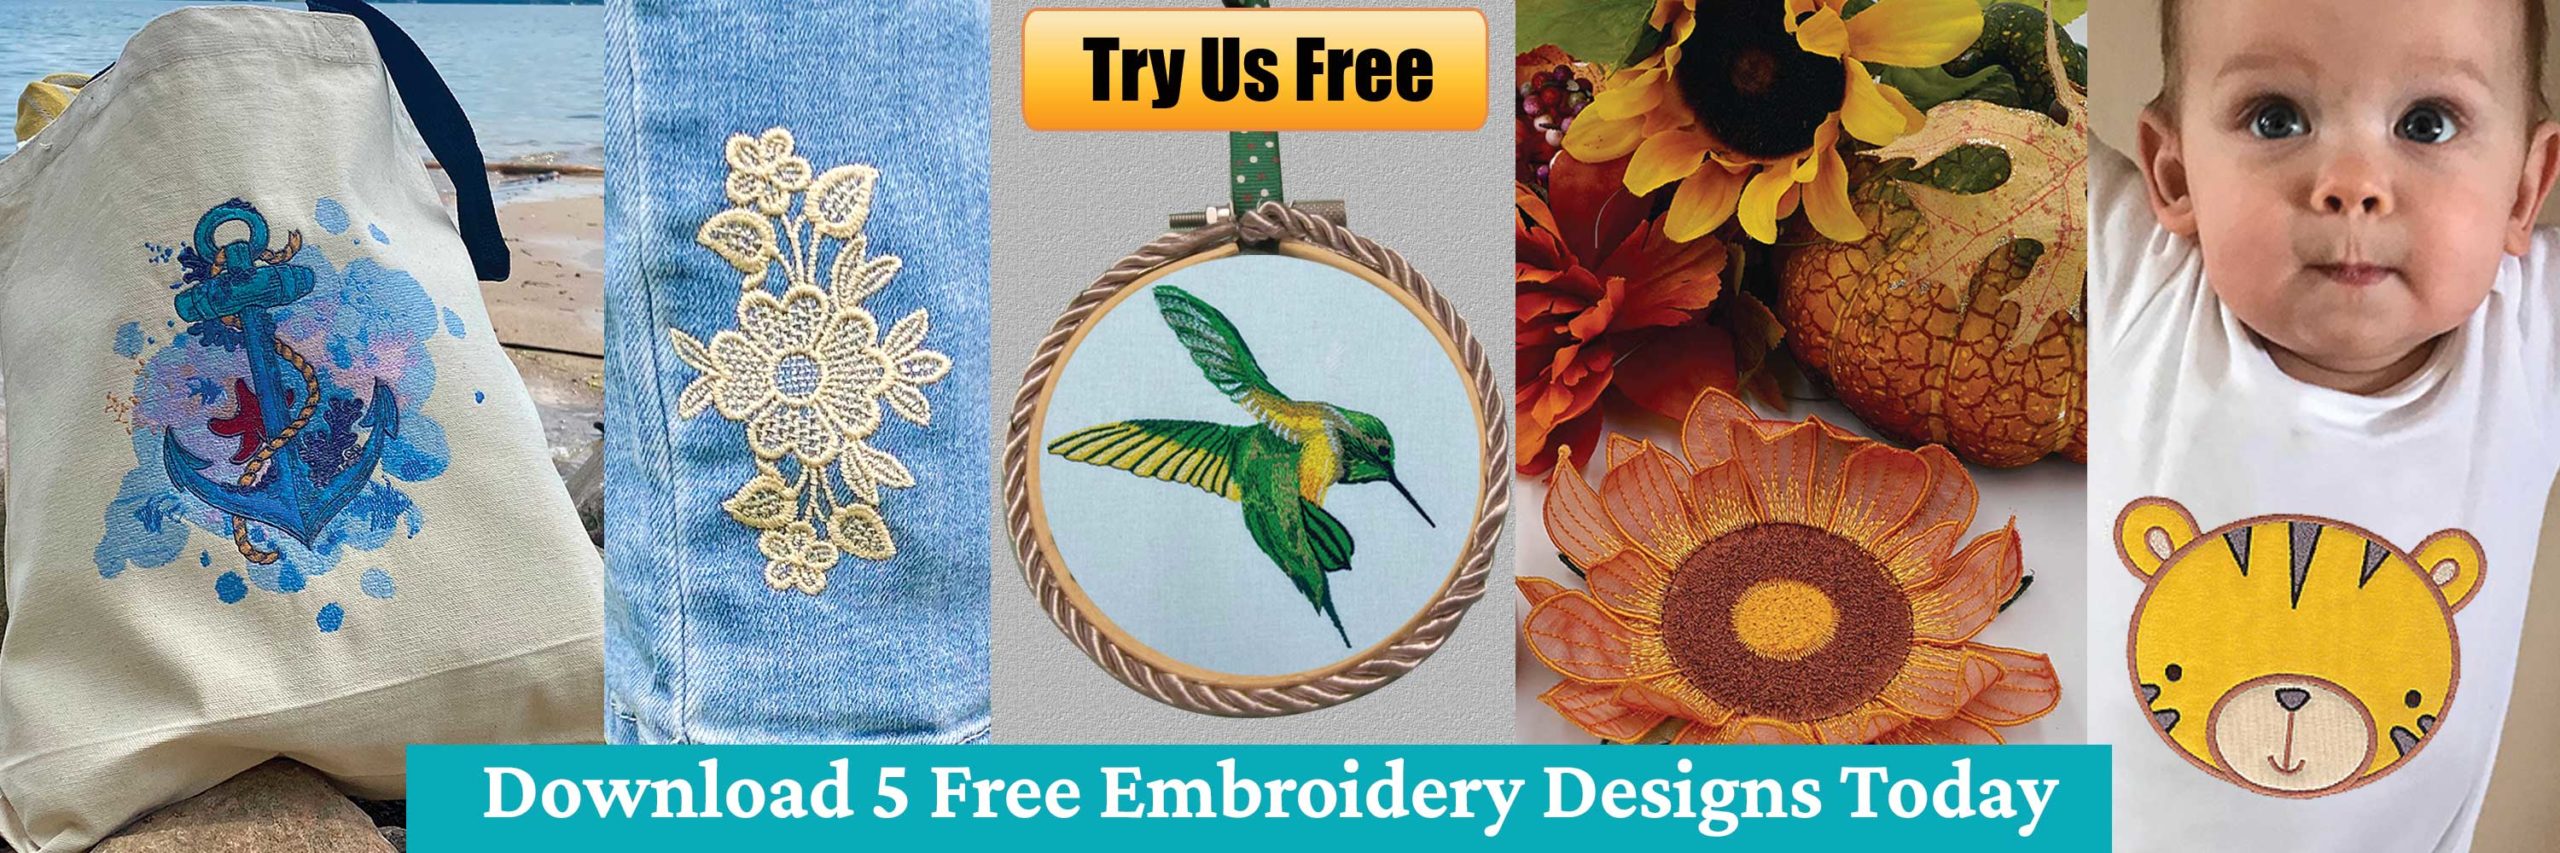 Free Embroidery Legacy Design Kit